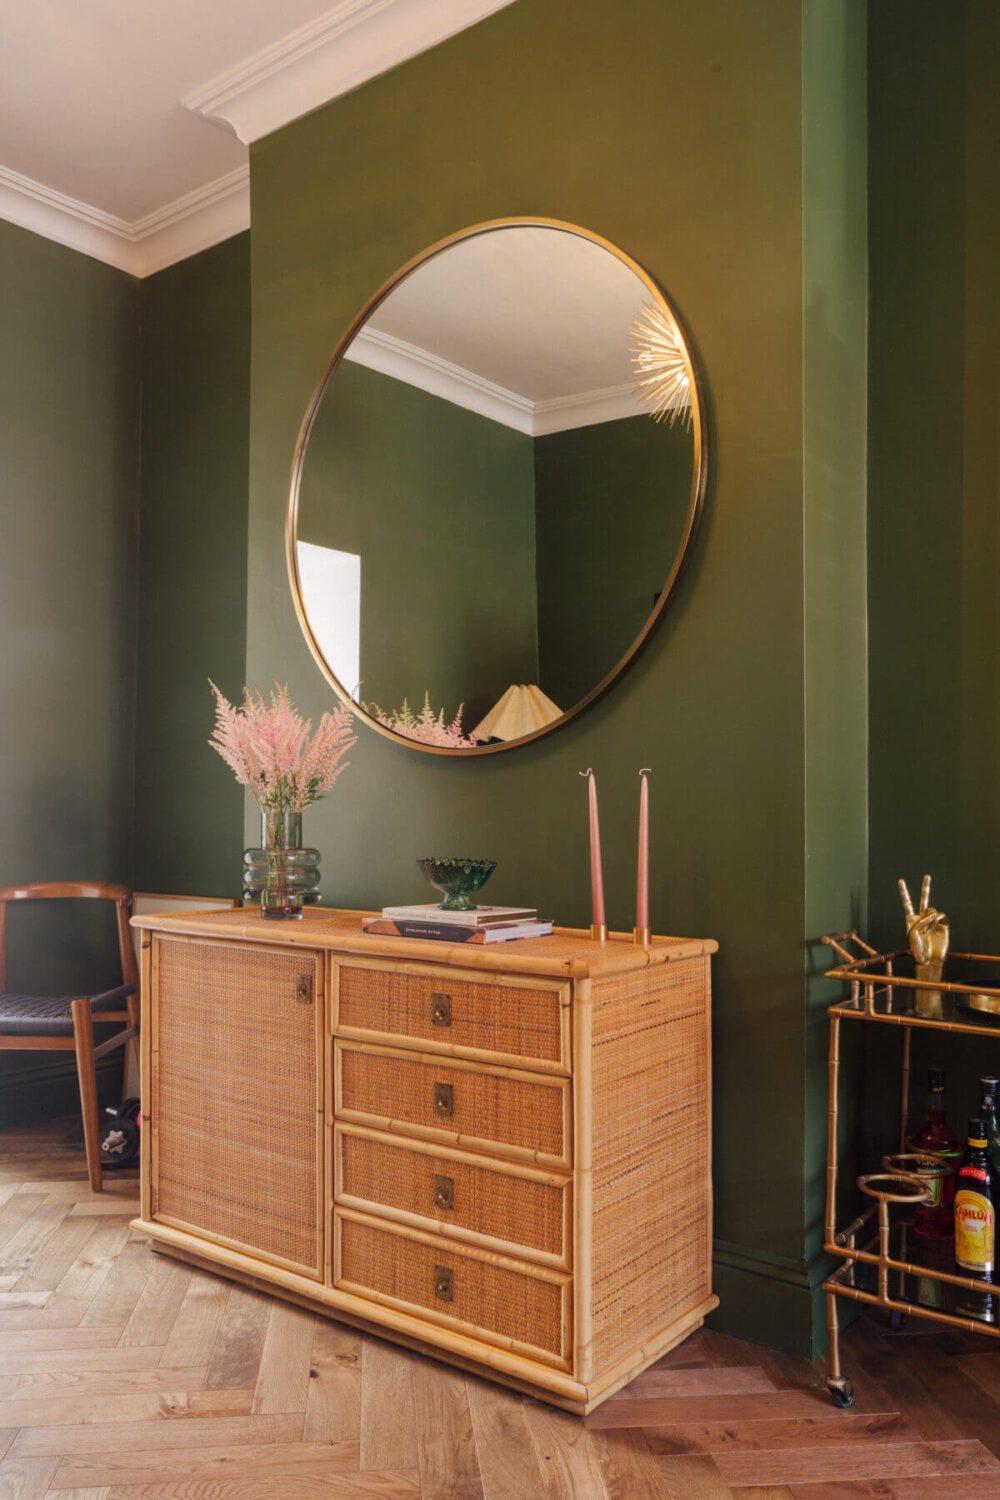 green-living-room-round-mirror-victorian-townhouse-london-nordroom